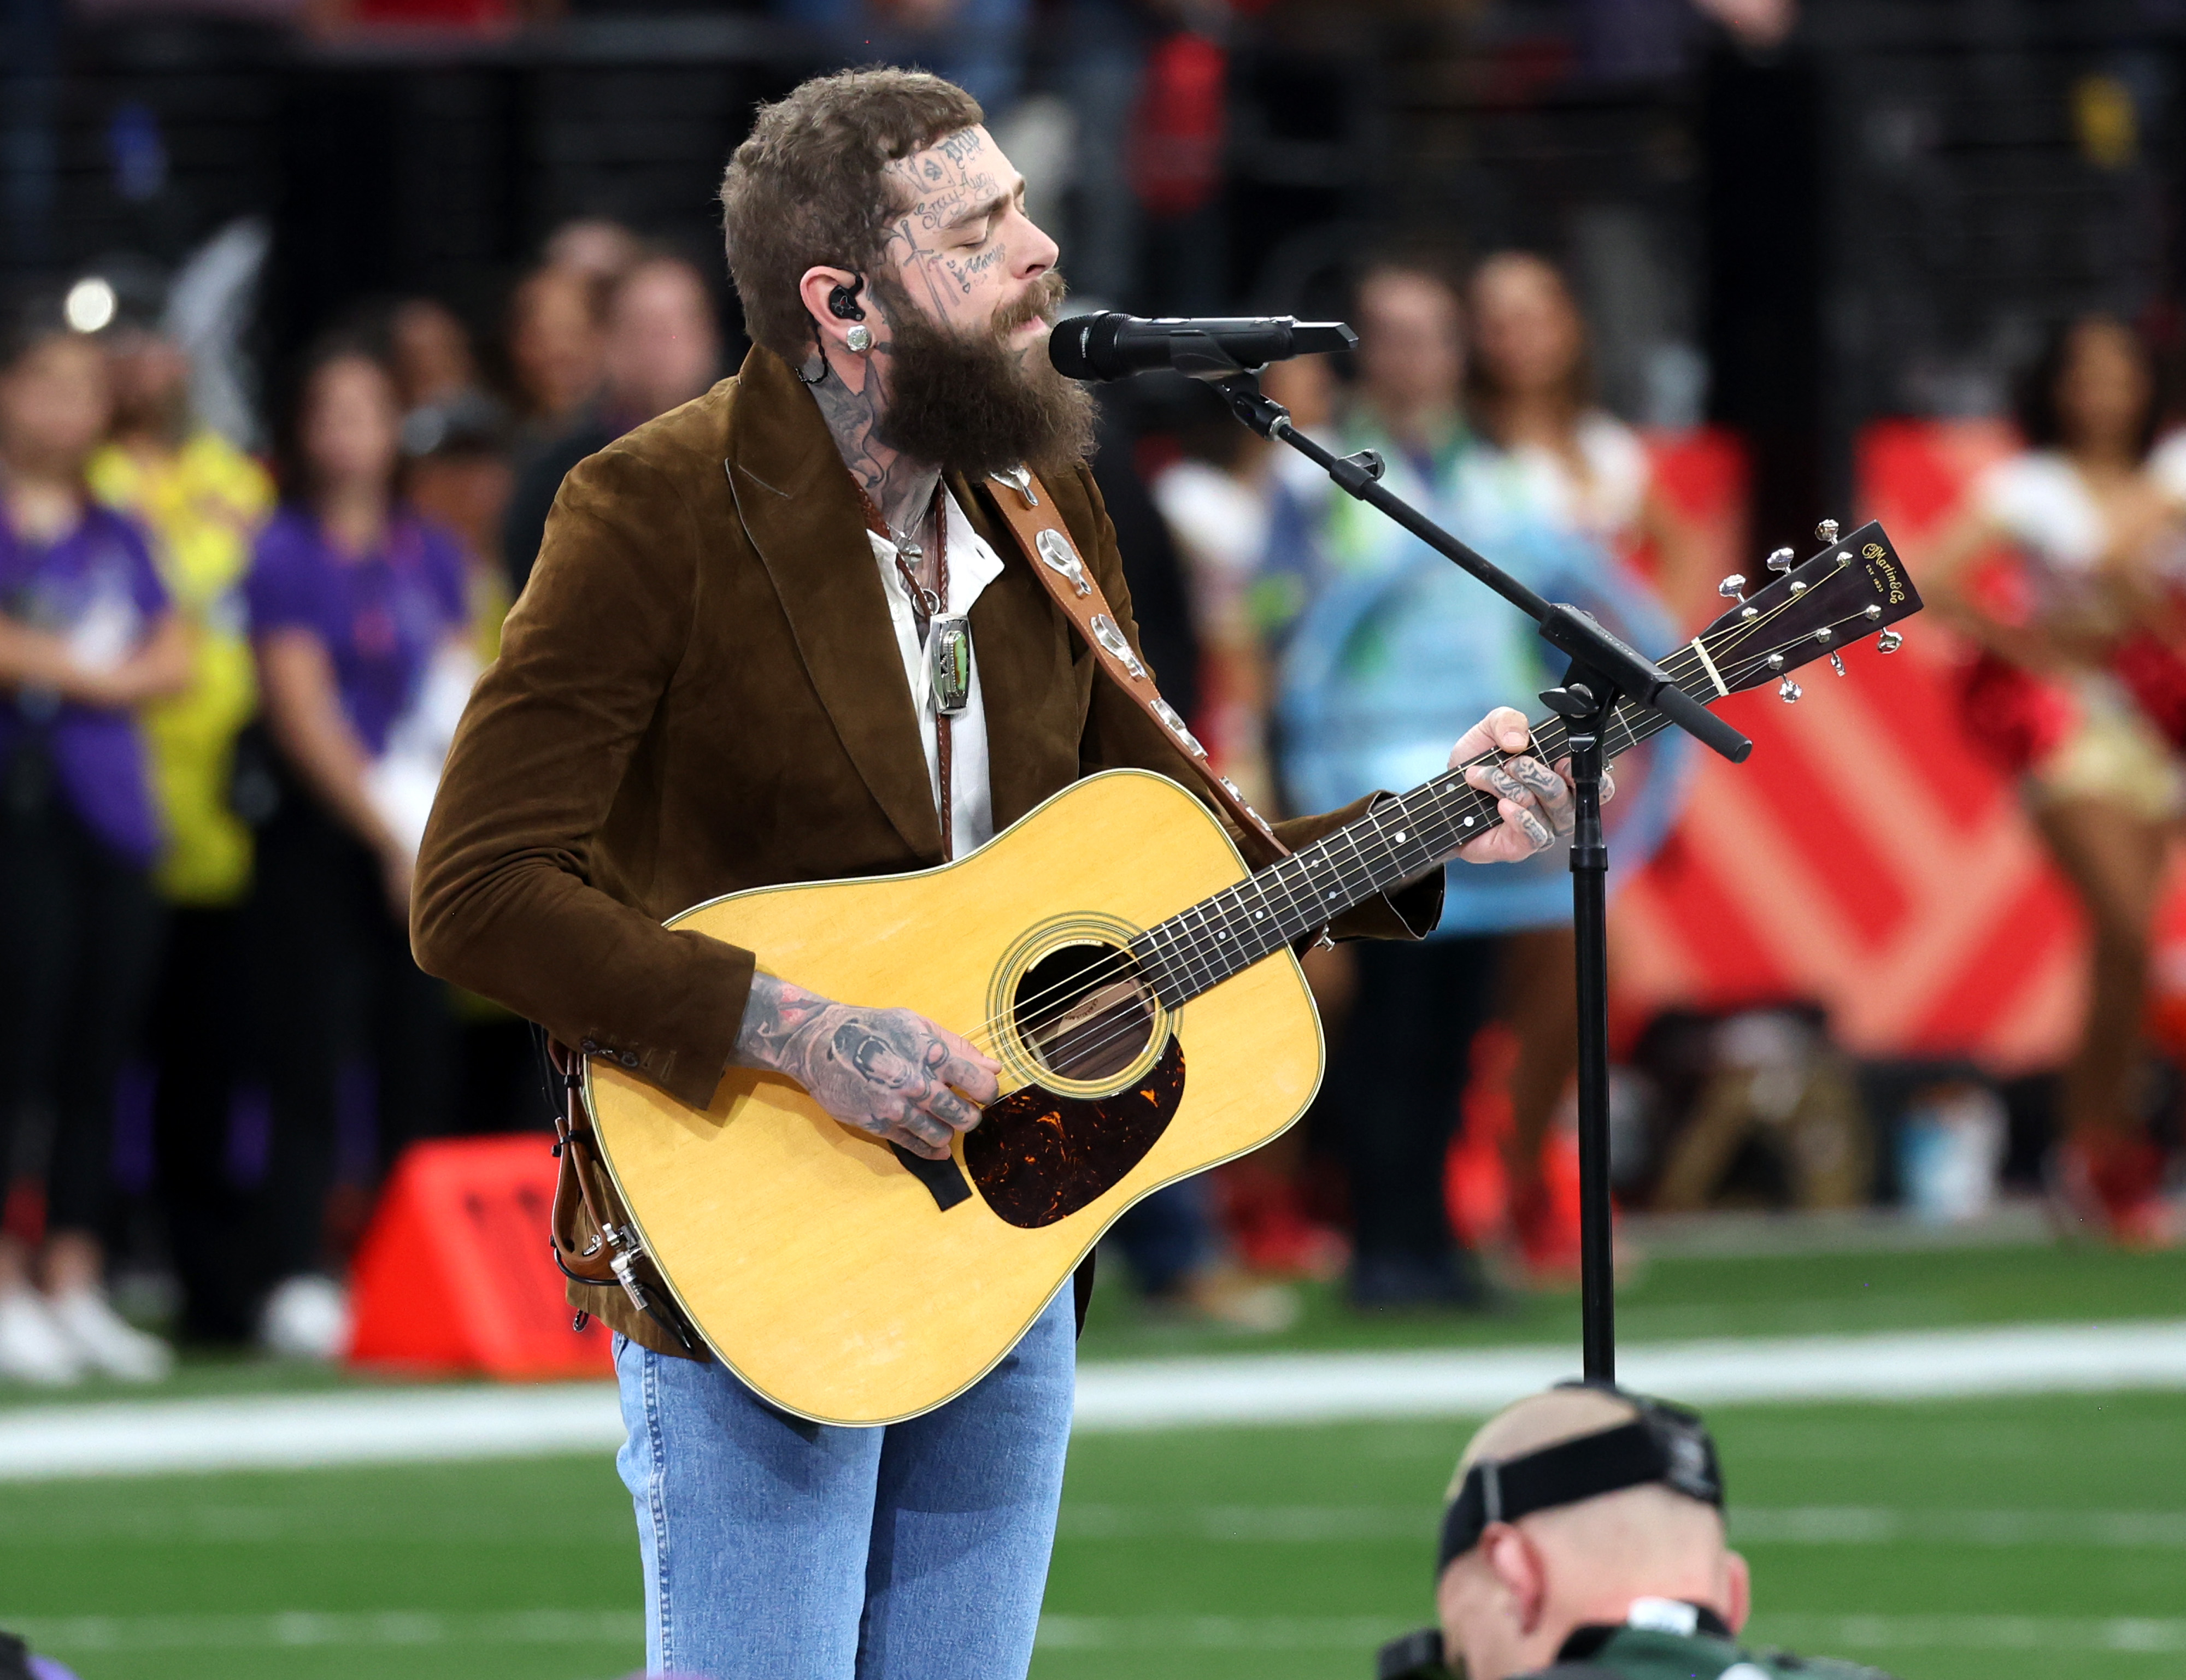 Post Malone singing on the field